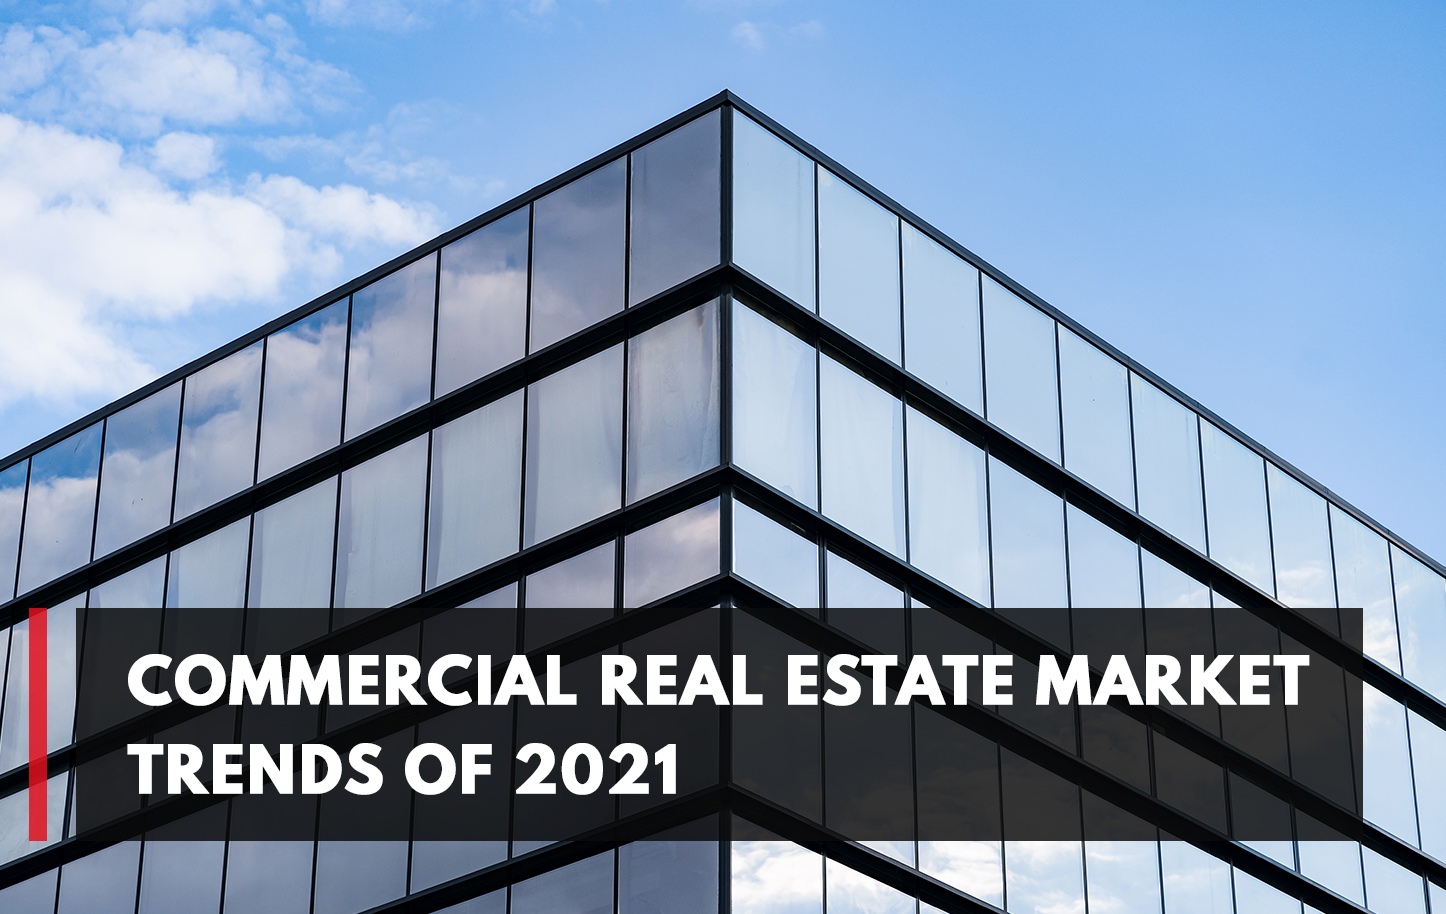 Commercial real estate market trends of 2021 My Perfect Workplace